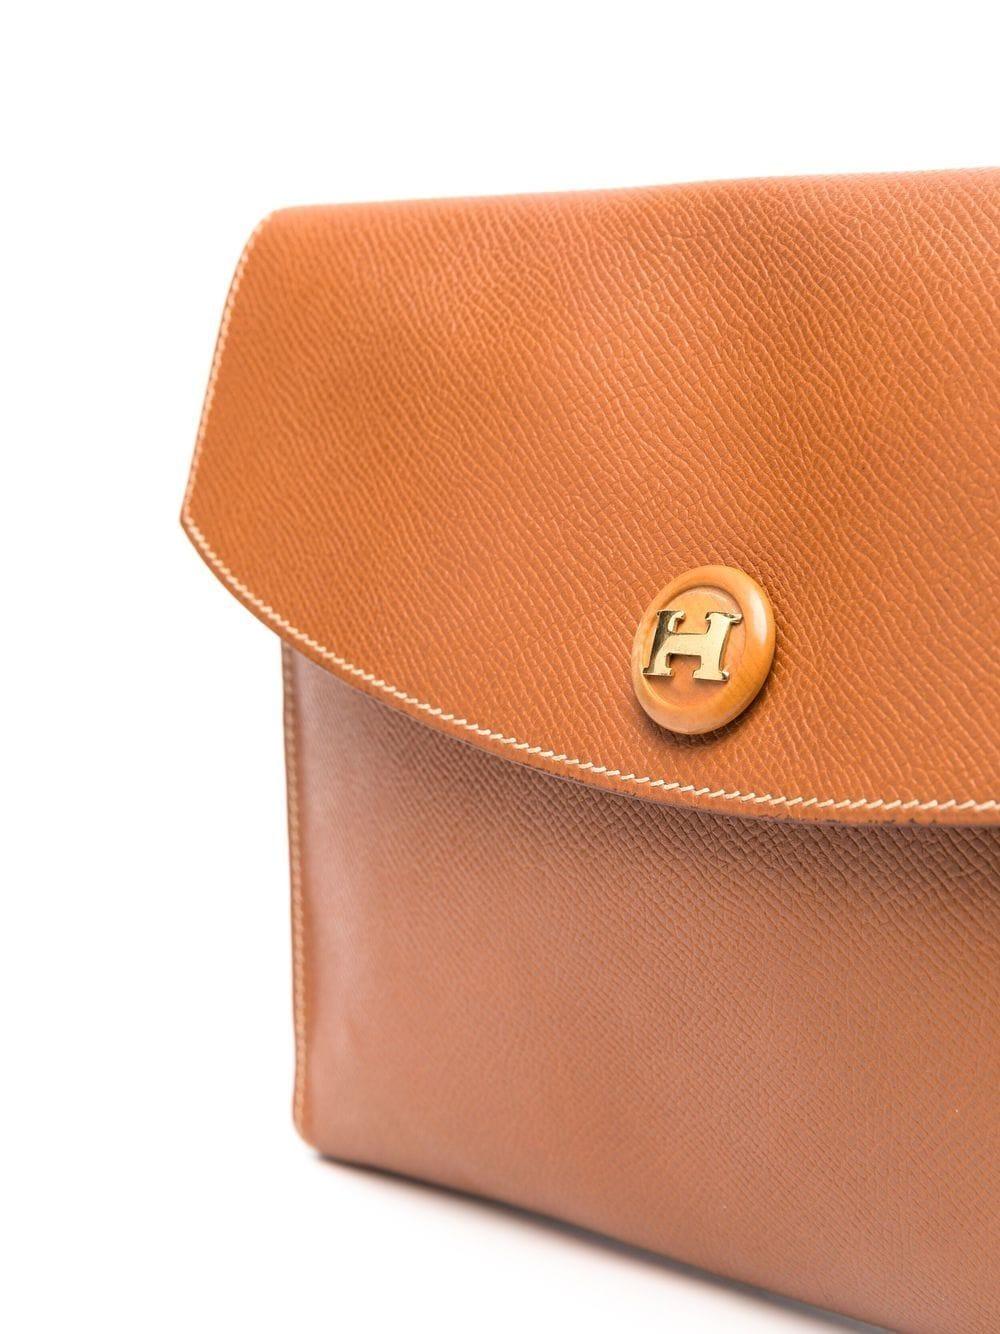 Hermes camel Courchevel leather Rio clutch featuring an envelope design, a logo-embossed buttons, foldover top with press-stud fastening, inside stamp Hermes Paris.
Circa 1985
In good vintage condition. Made in France.
We guarantee you will receive